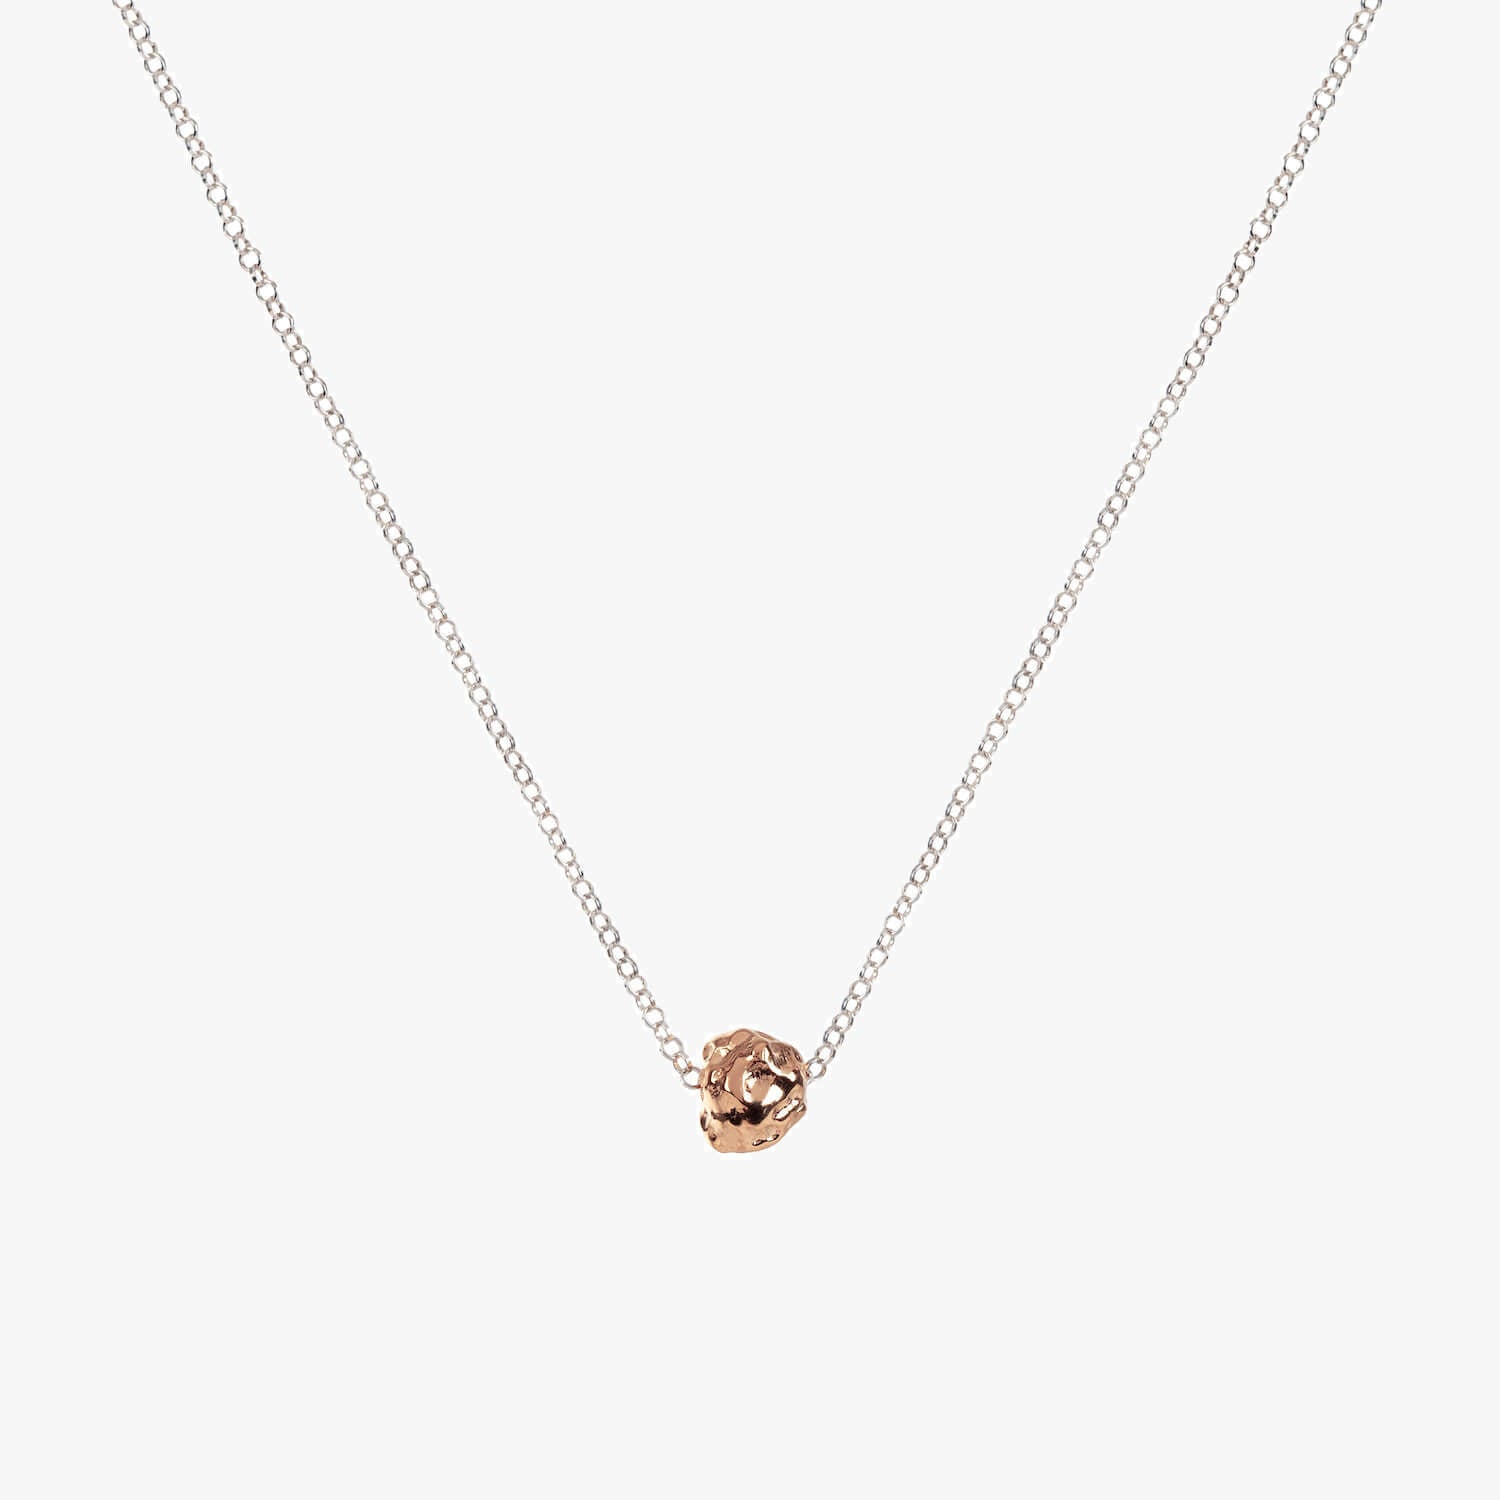 Rose gold large meteorite style textured charm on silver chain